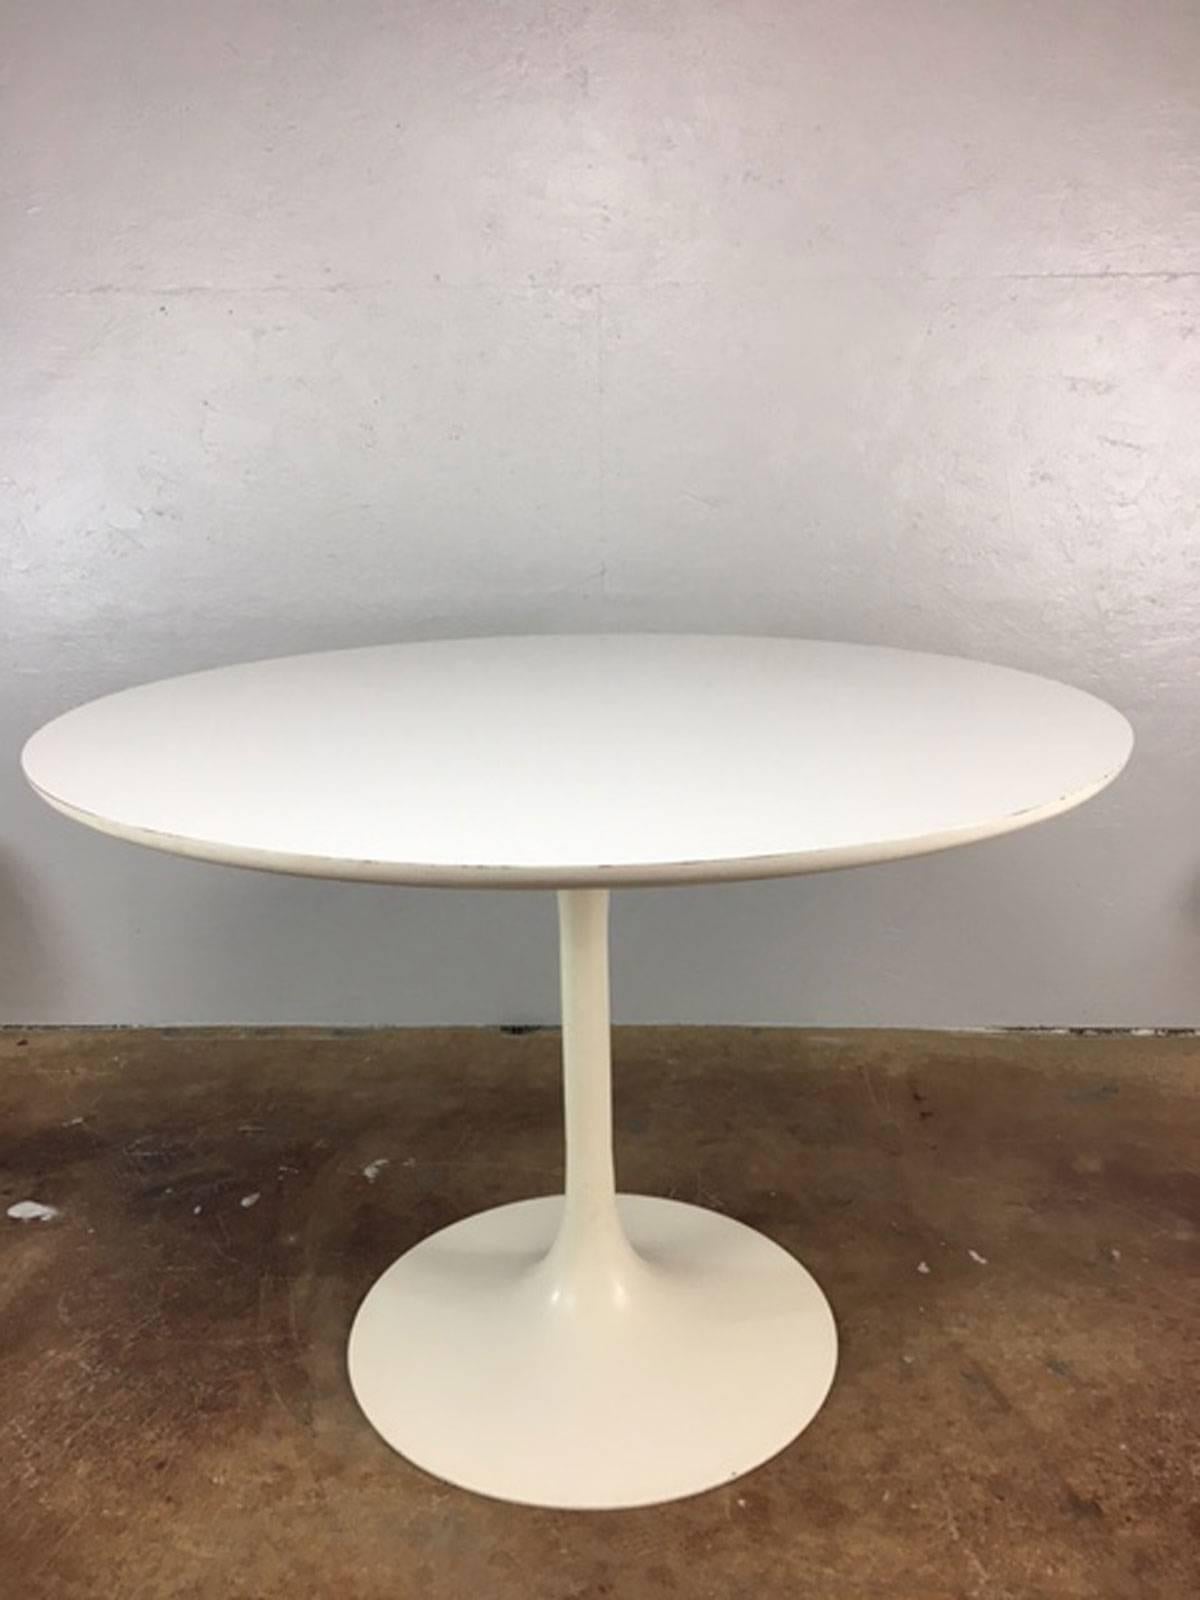 Classic tulip style dining table by Burke of Texas. Table is in very good shape overall with typical acceptable life wear for a dining table dated, circa 1970s.